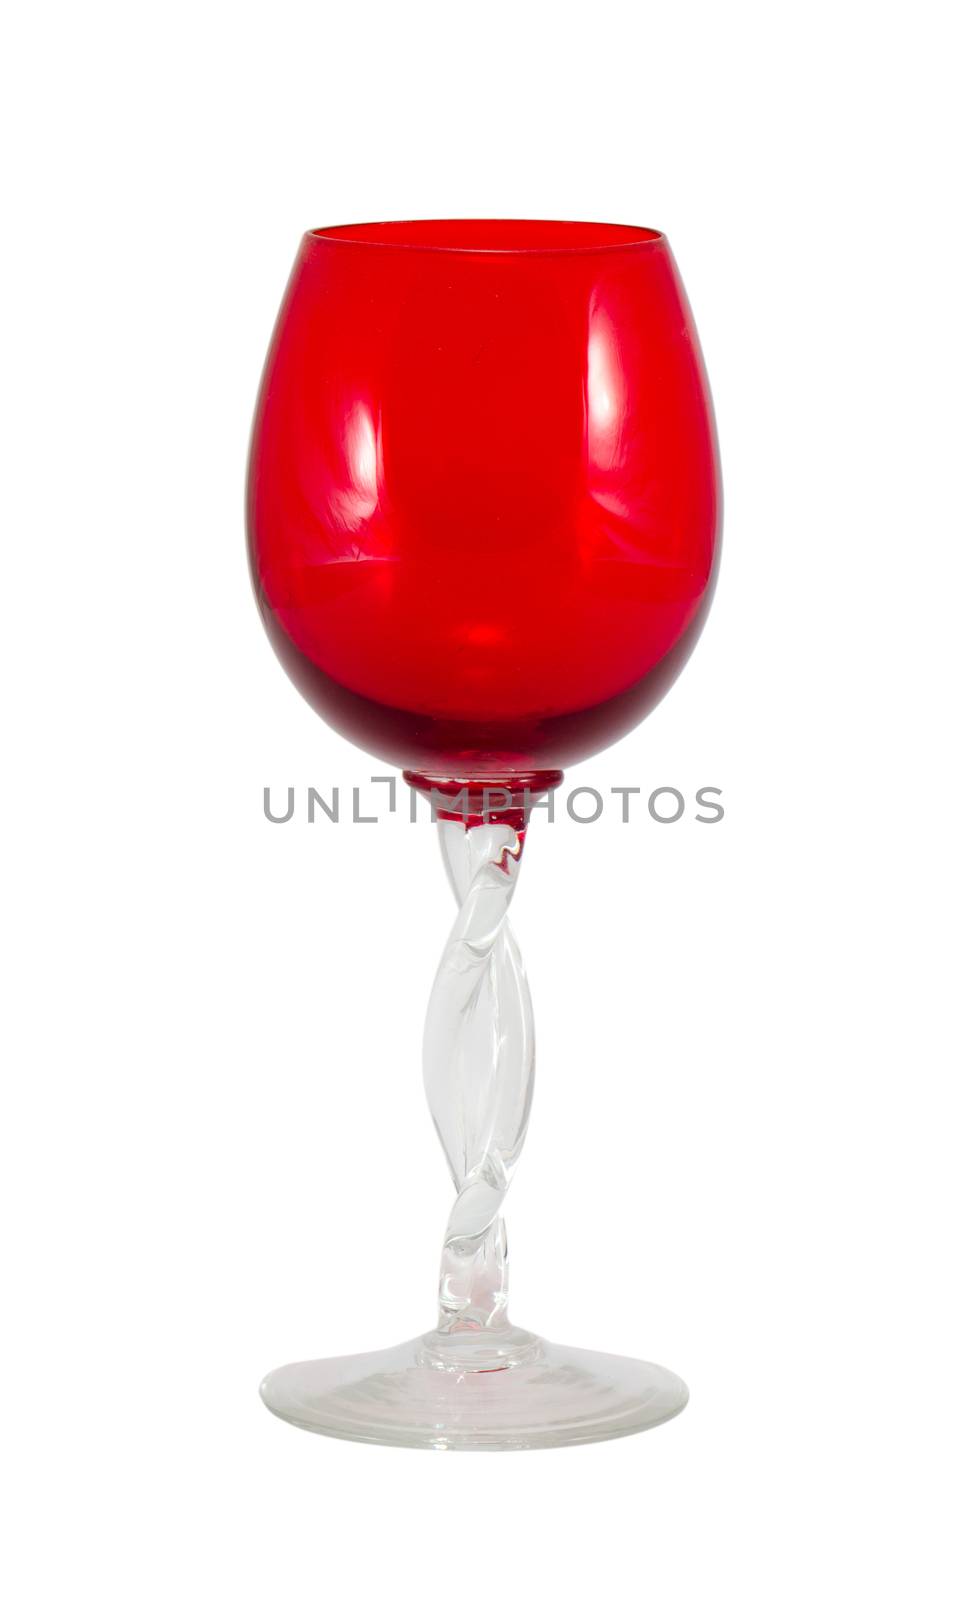 red retro wineglass wine glass with beautiful curvy handle isolated on white background.